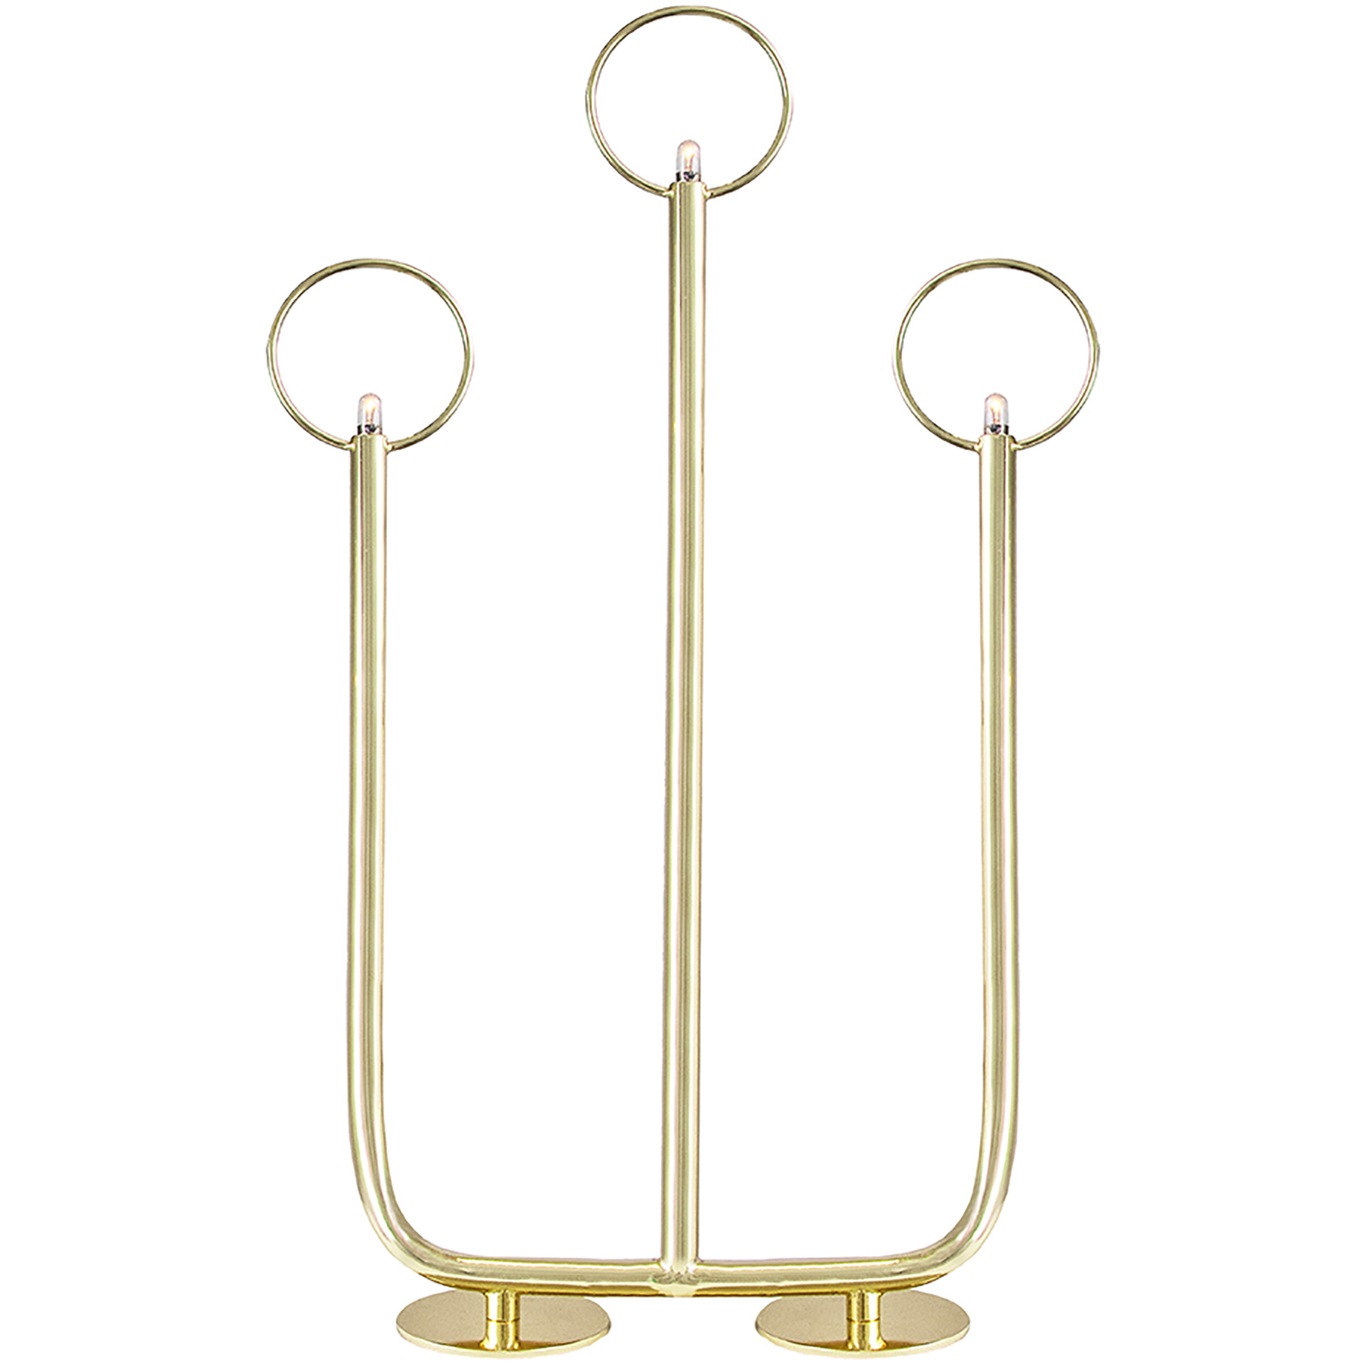 Natale 3 Advent Candle Holder, Brass